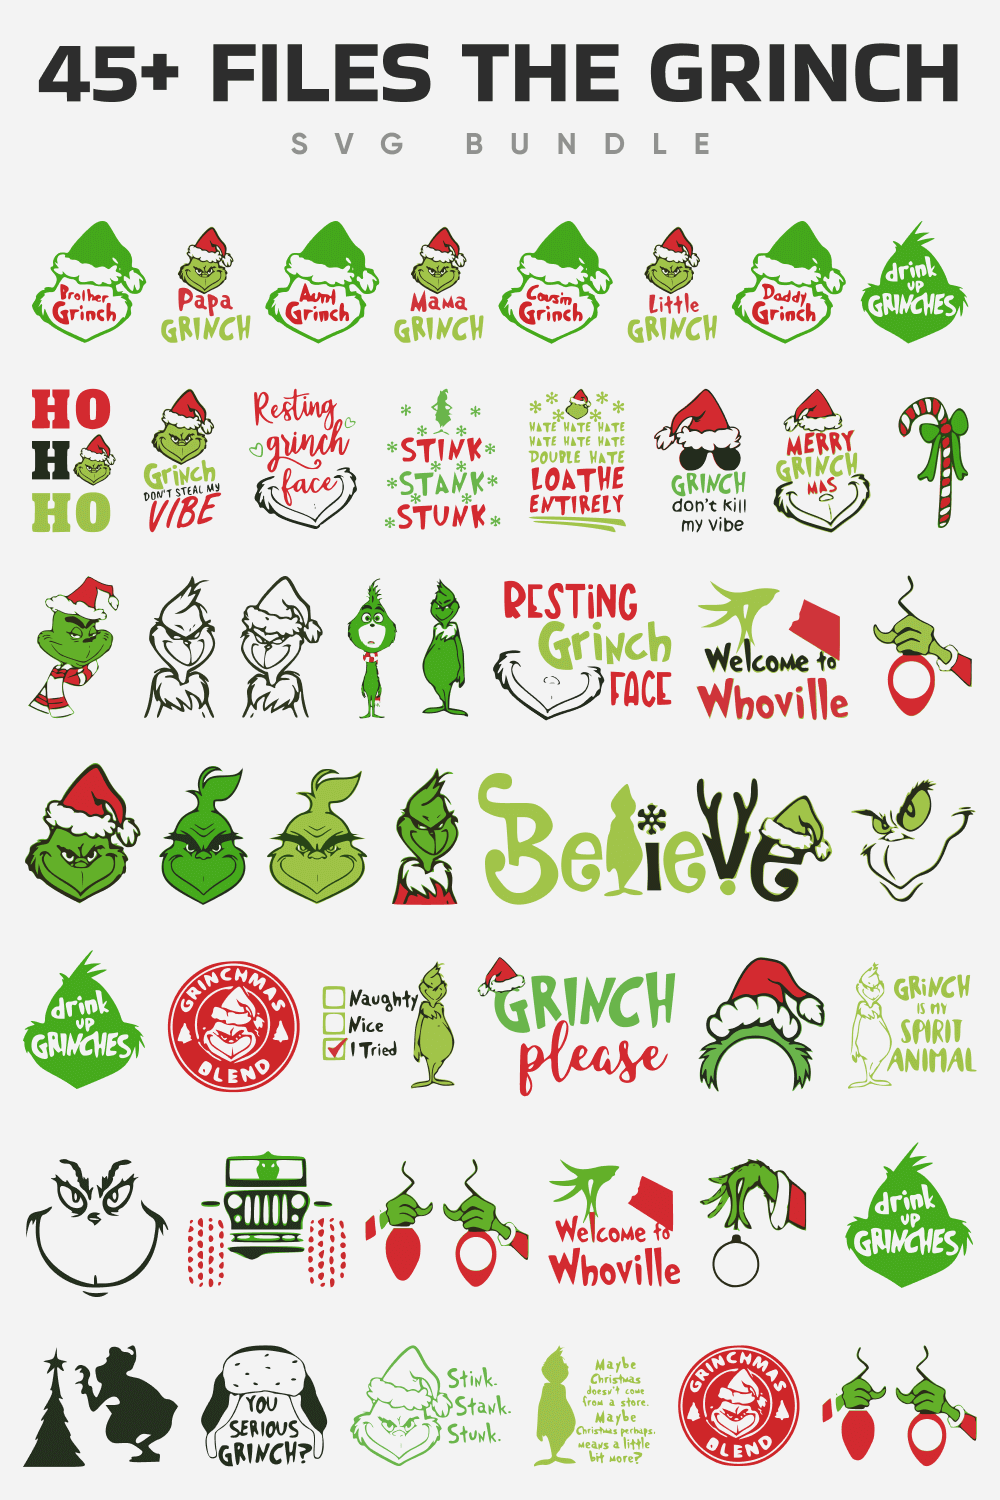 Files with the image of the Grinch family and files with a playful face of the Grinch.